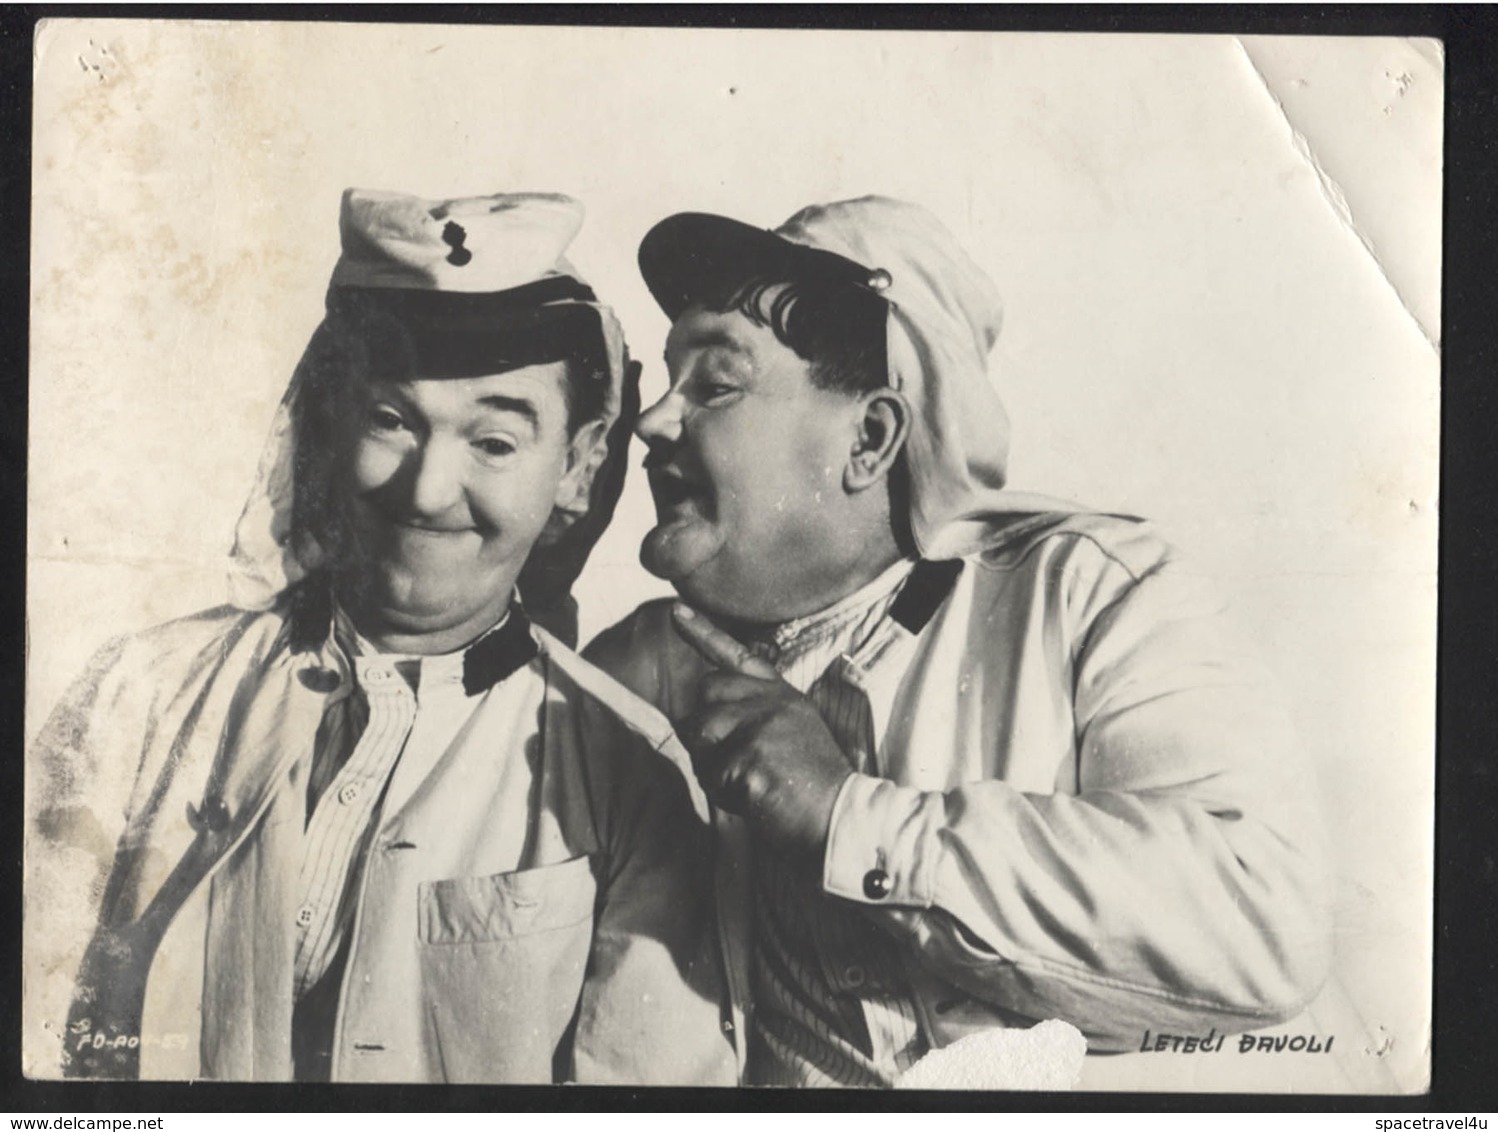 STAN LAUREL, OLIVER HARDY (MOVIE "The Flying Deuces" 1939.) - Vintage LOBBY CARD - LC3-64 - Cinema Advertisement